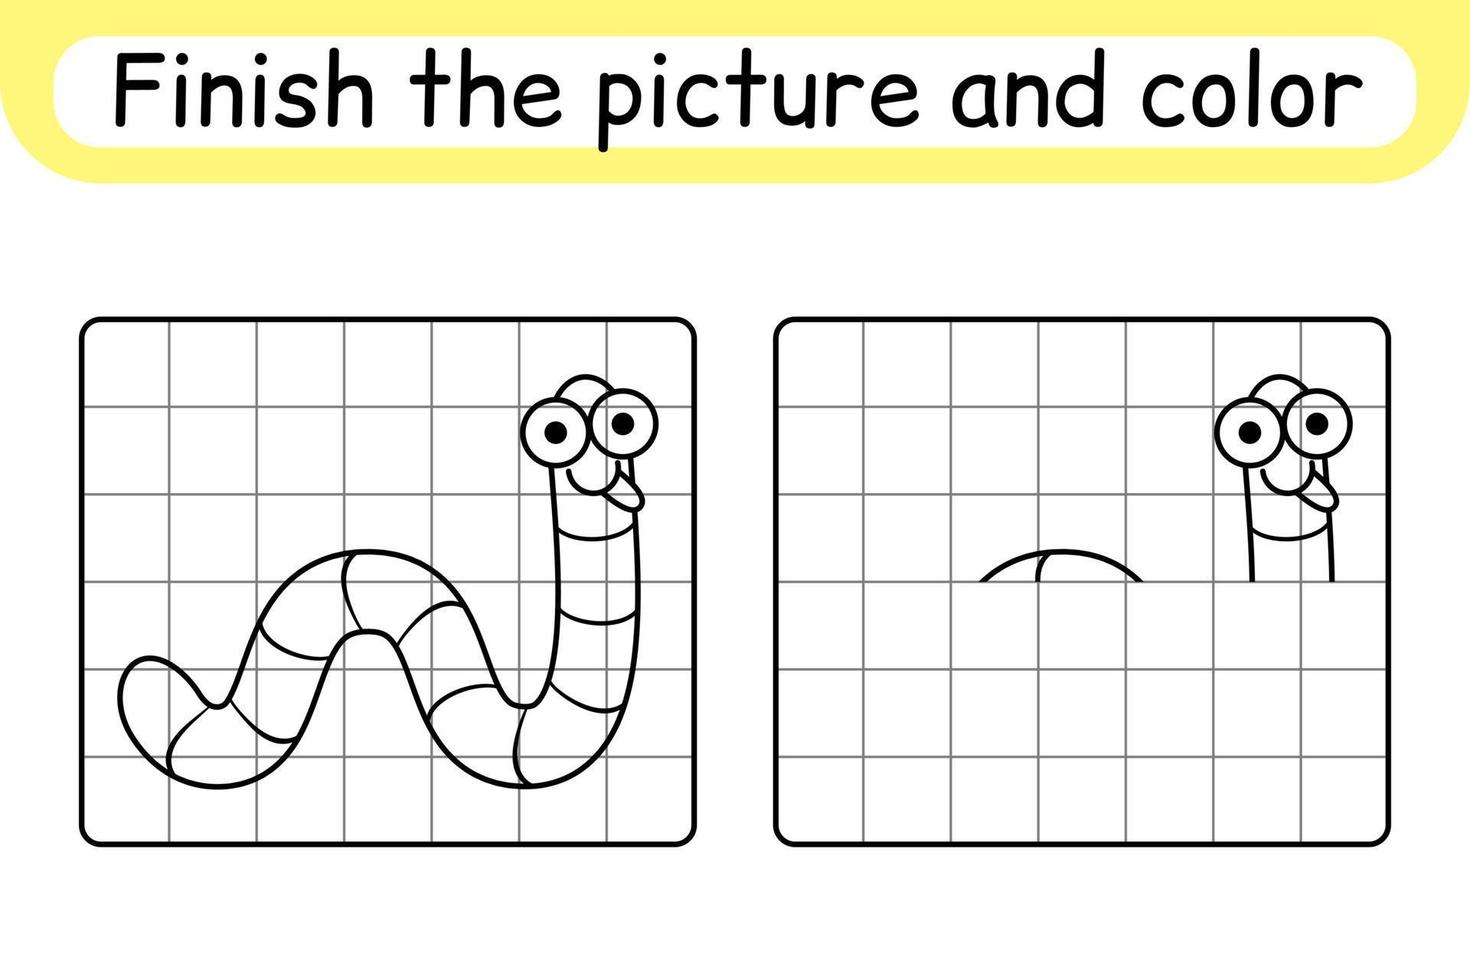 Complete the picture worm. Copy the picture and color. Finish the image. Coloring book. Educational drawing exercise game for children vector